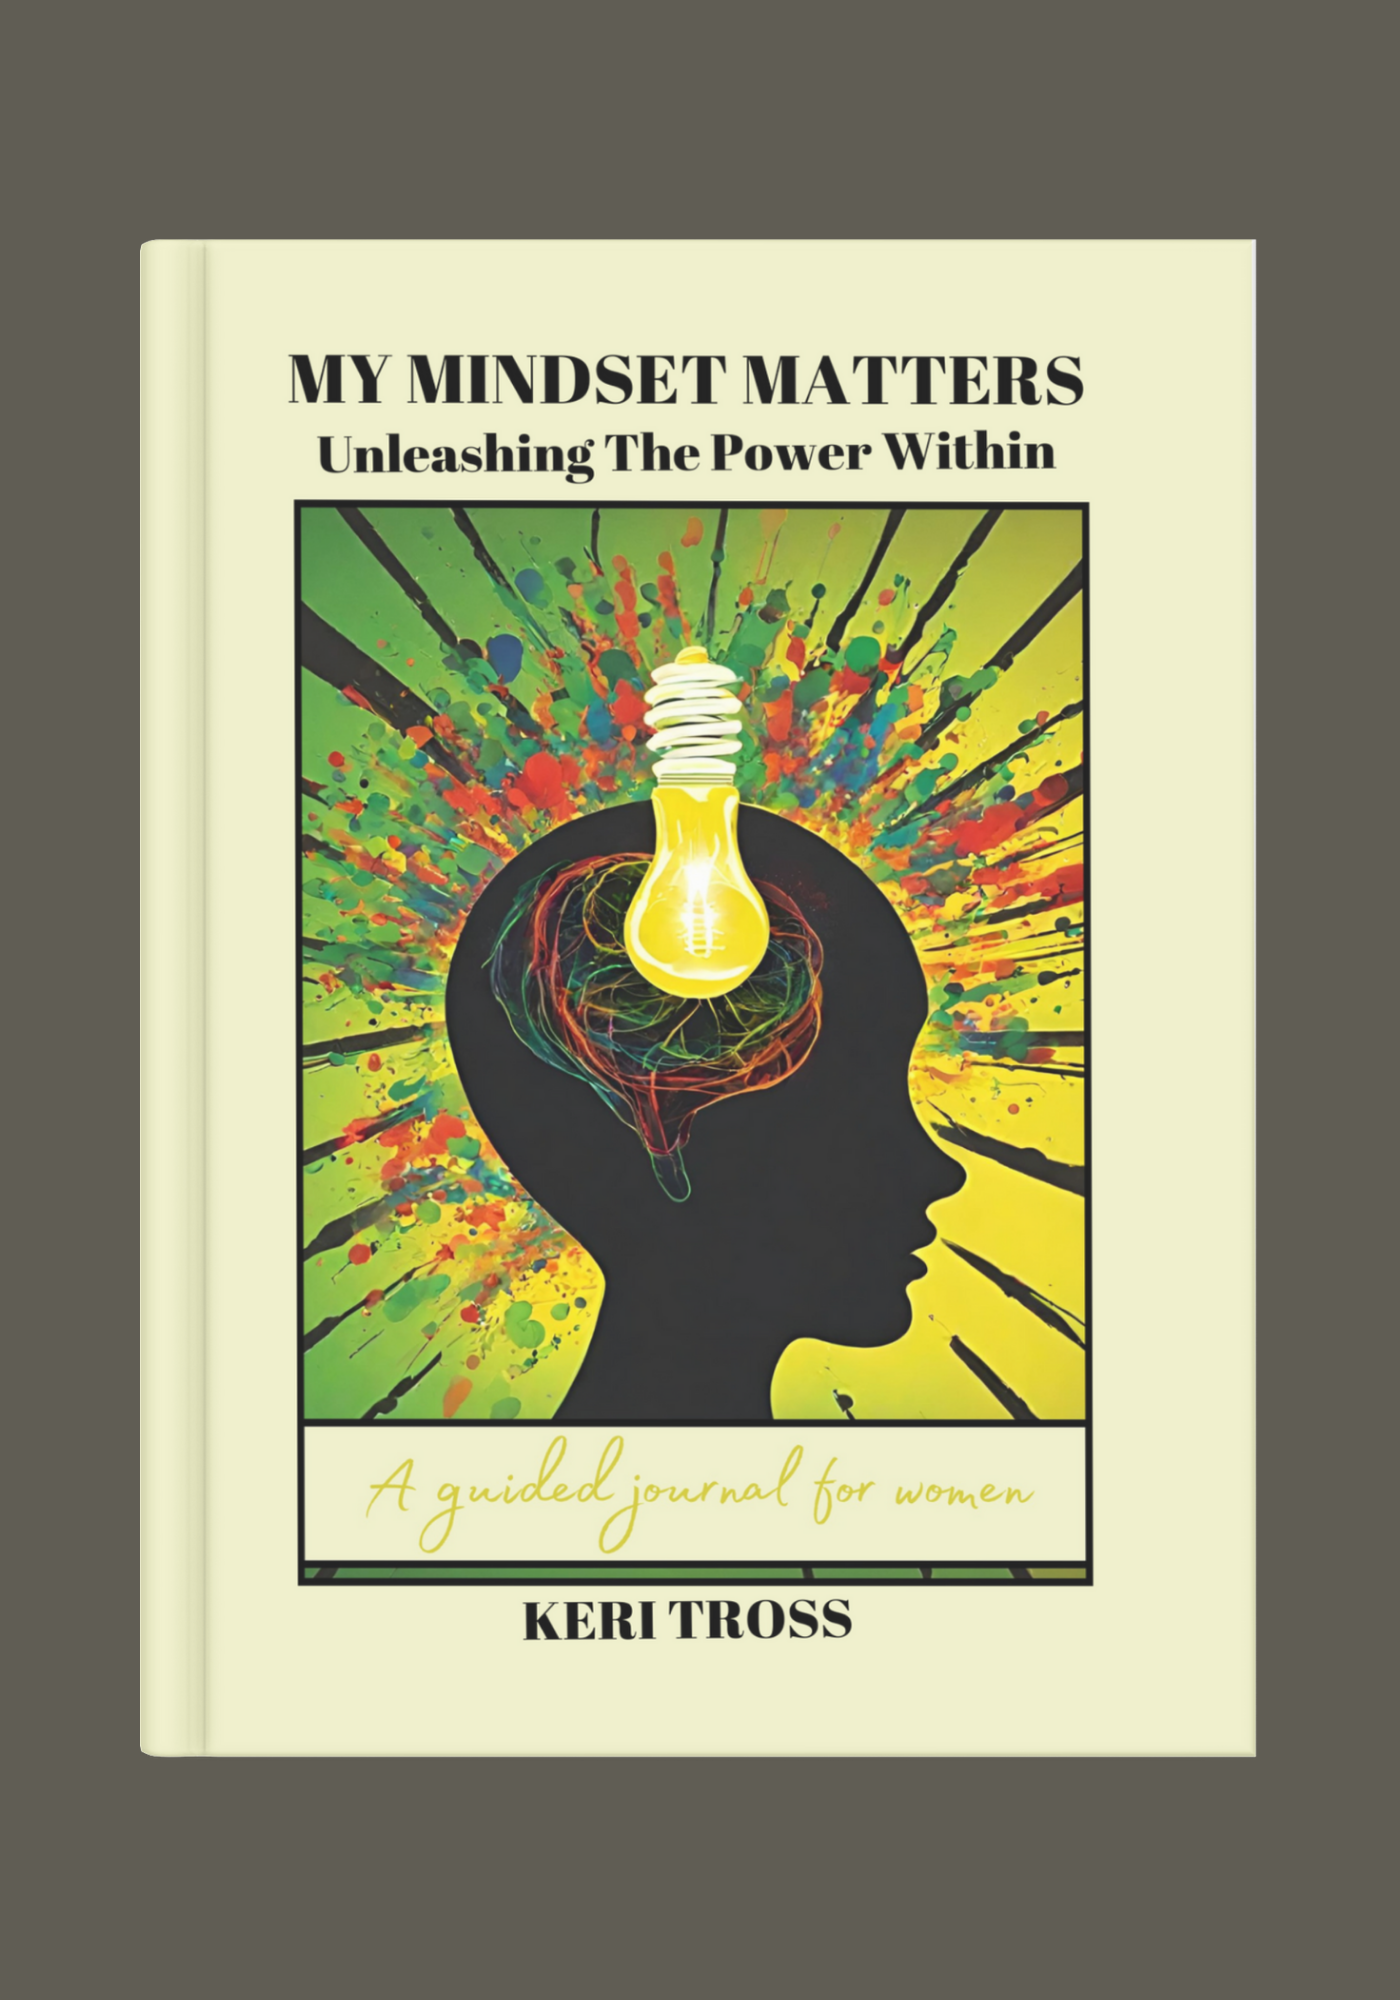 MY MINDSET MATTERS: Unleashing The Power Within